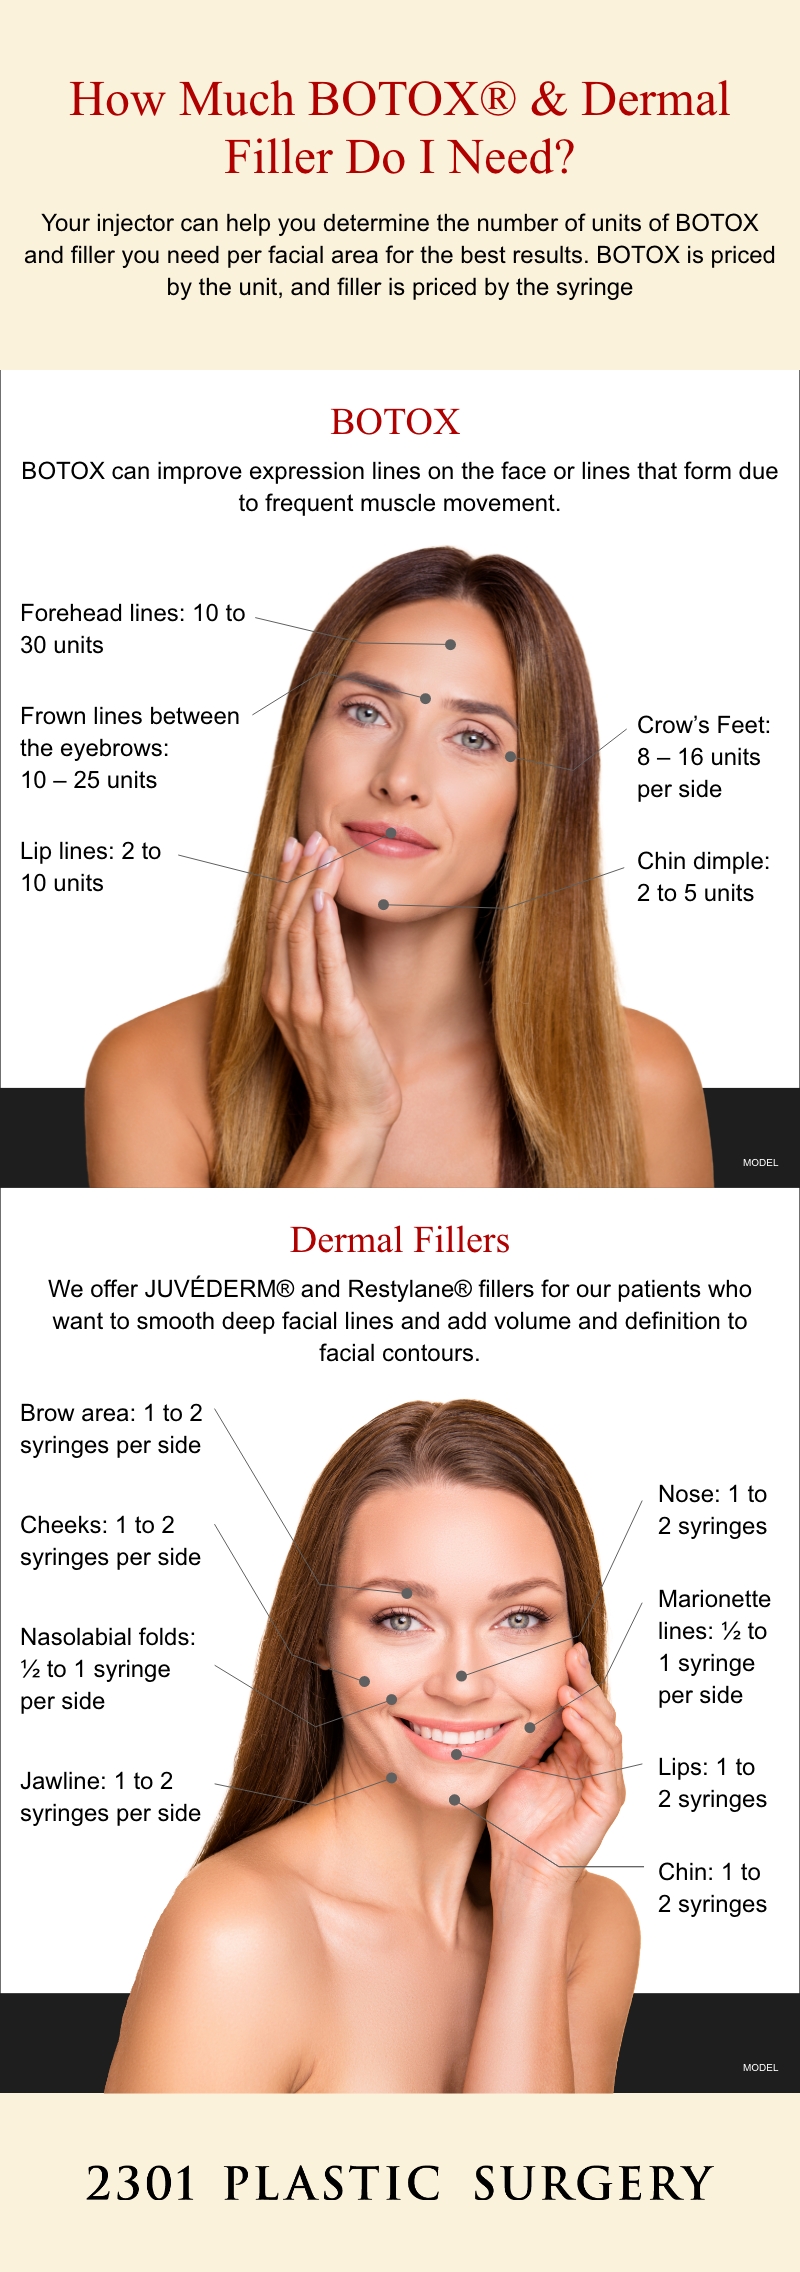 Instagraphic on how much BOTOX® and dermal fillers are needed per facial area for the best results. (MODELS)